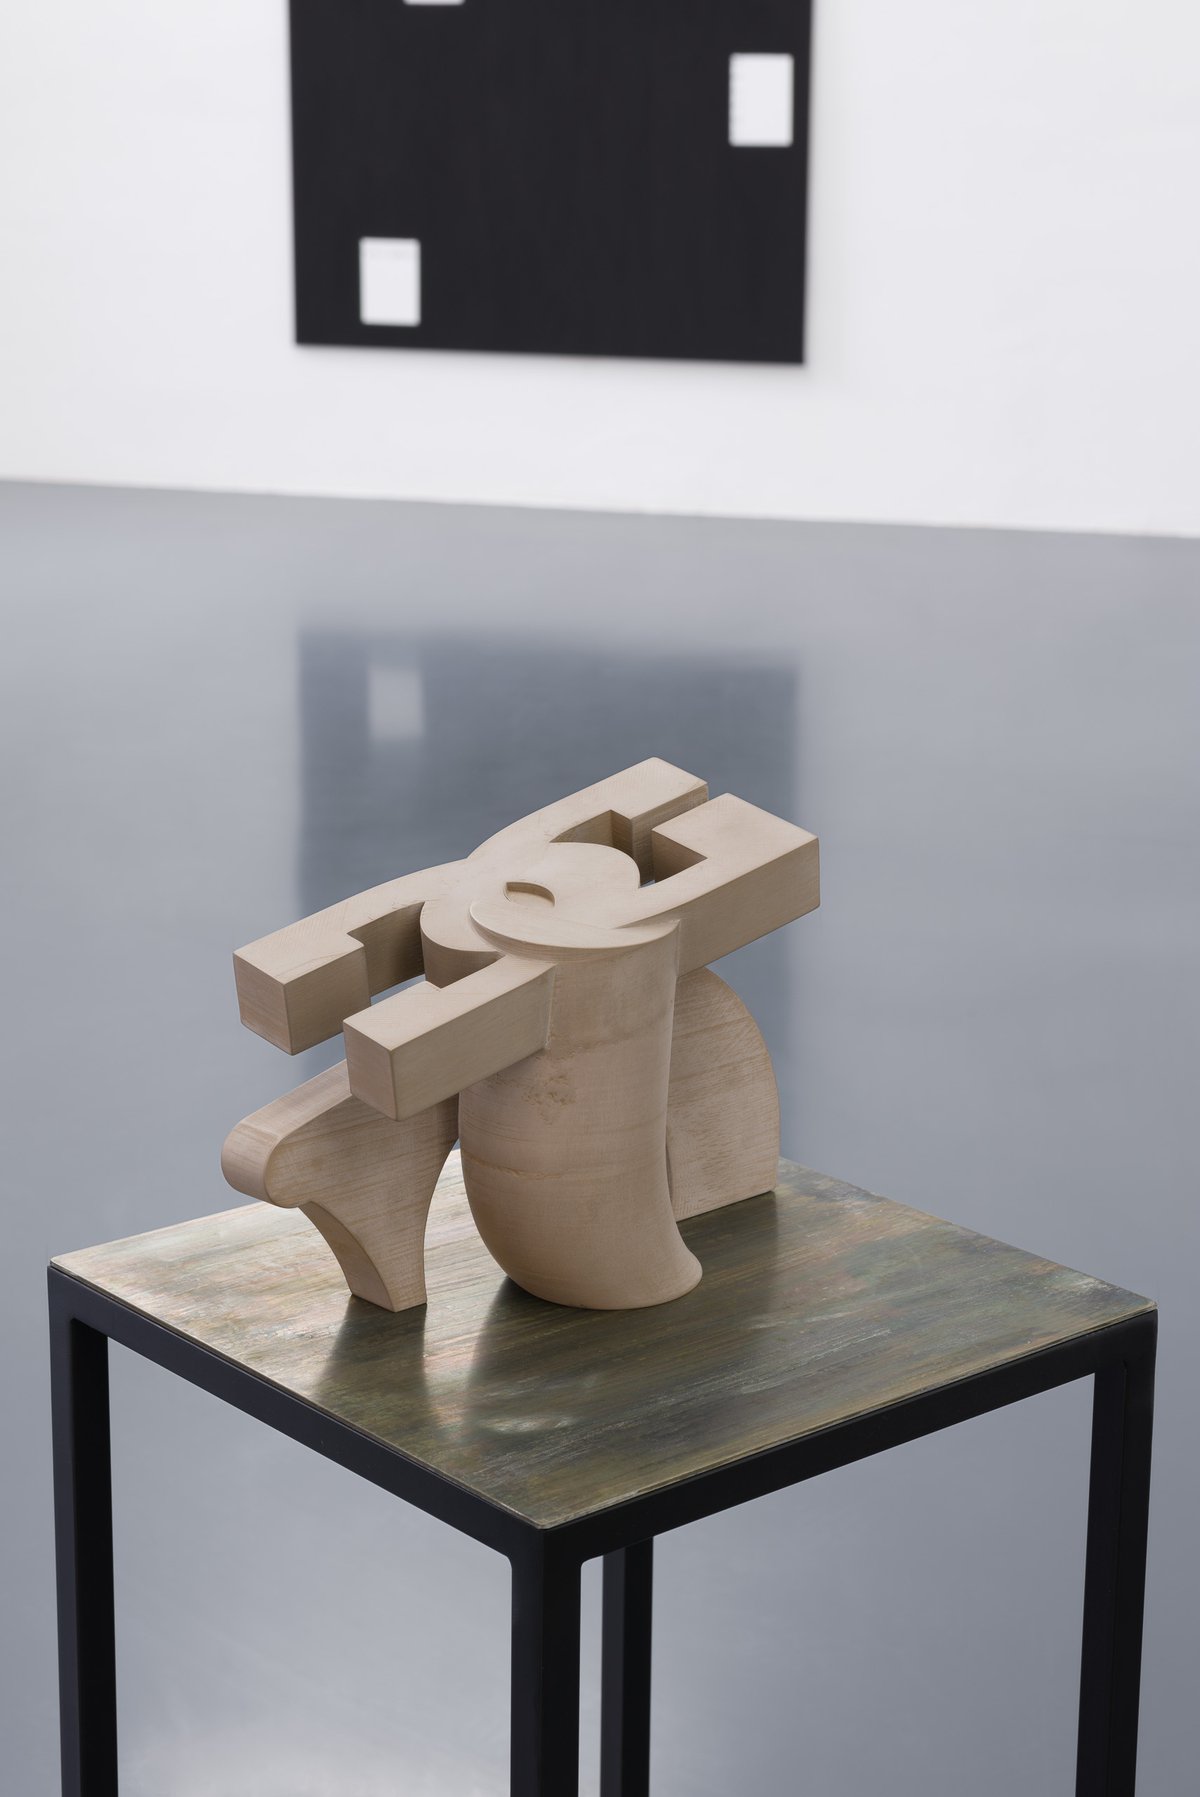 Andy BootSmart Sculpture (two)3D printed plastic and bronze composite21.7 x 13.9 x 31.3 cm